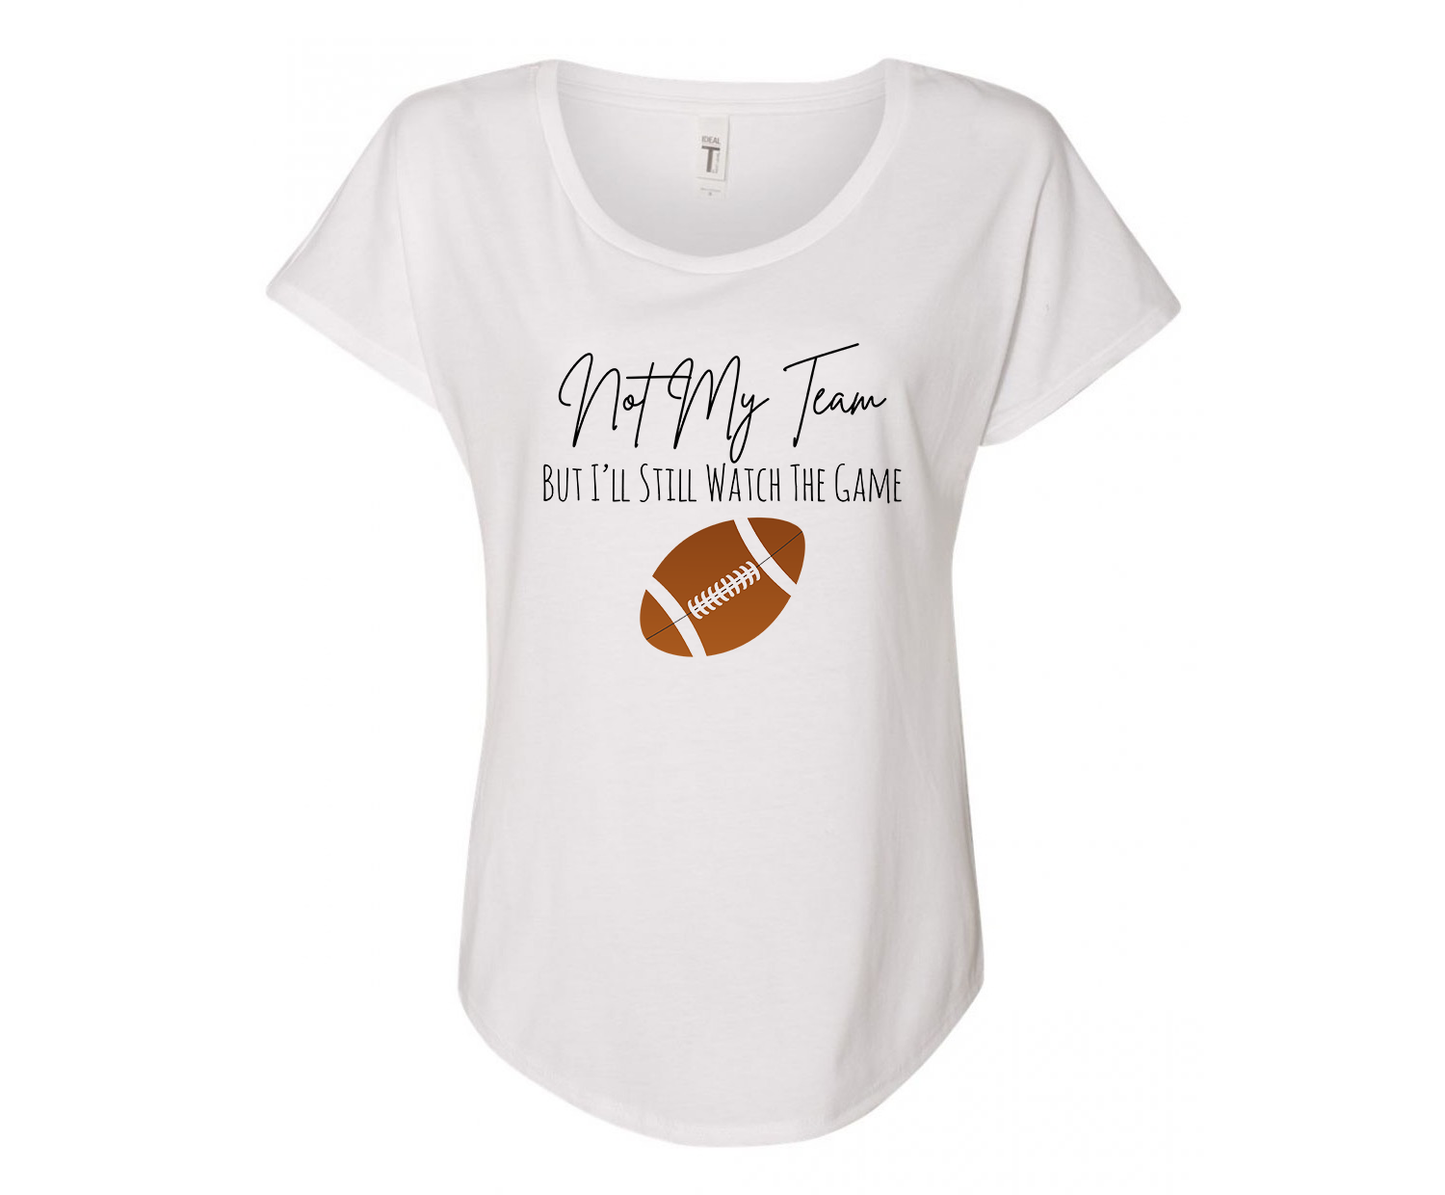 Not My Team But I'll Still Watch The Game Football Ladies Tee Shirt - In Grey & White